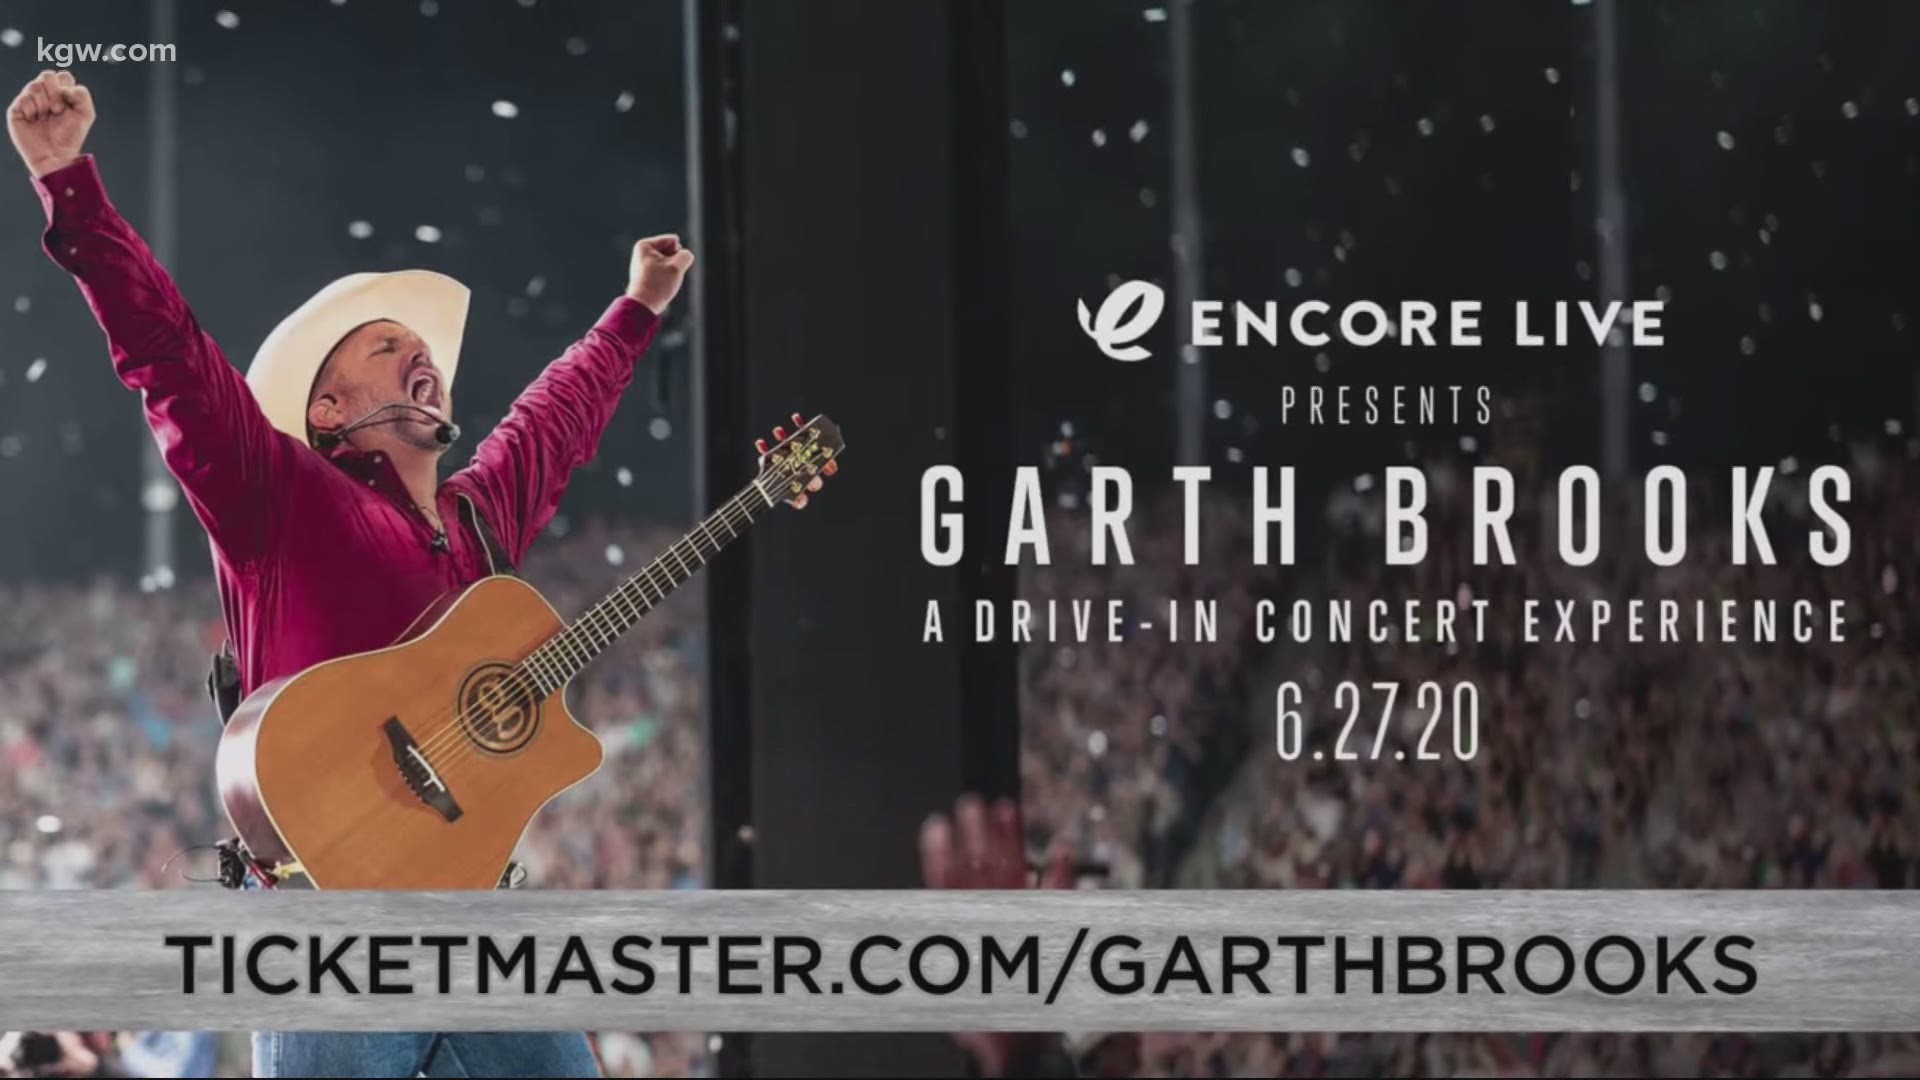 Garth Brooks is hosting a one-night-only concert that'll be played at hundreds of drive-in theaters across the U.S., including the 99W Drive-In in Newberg.